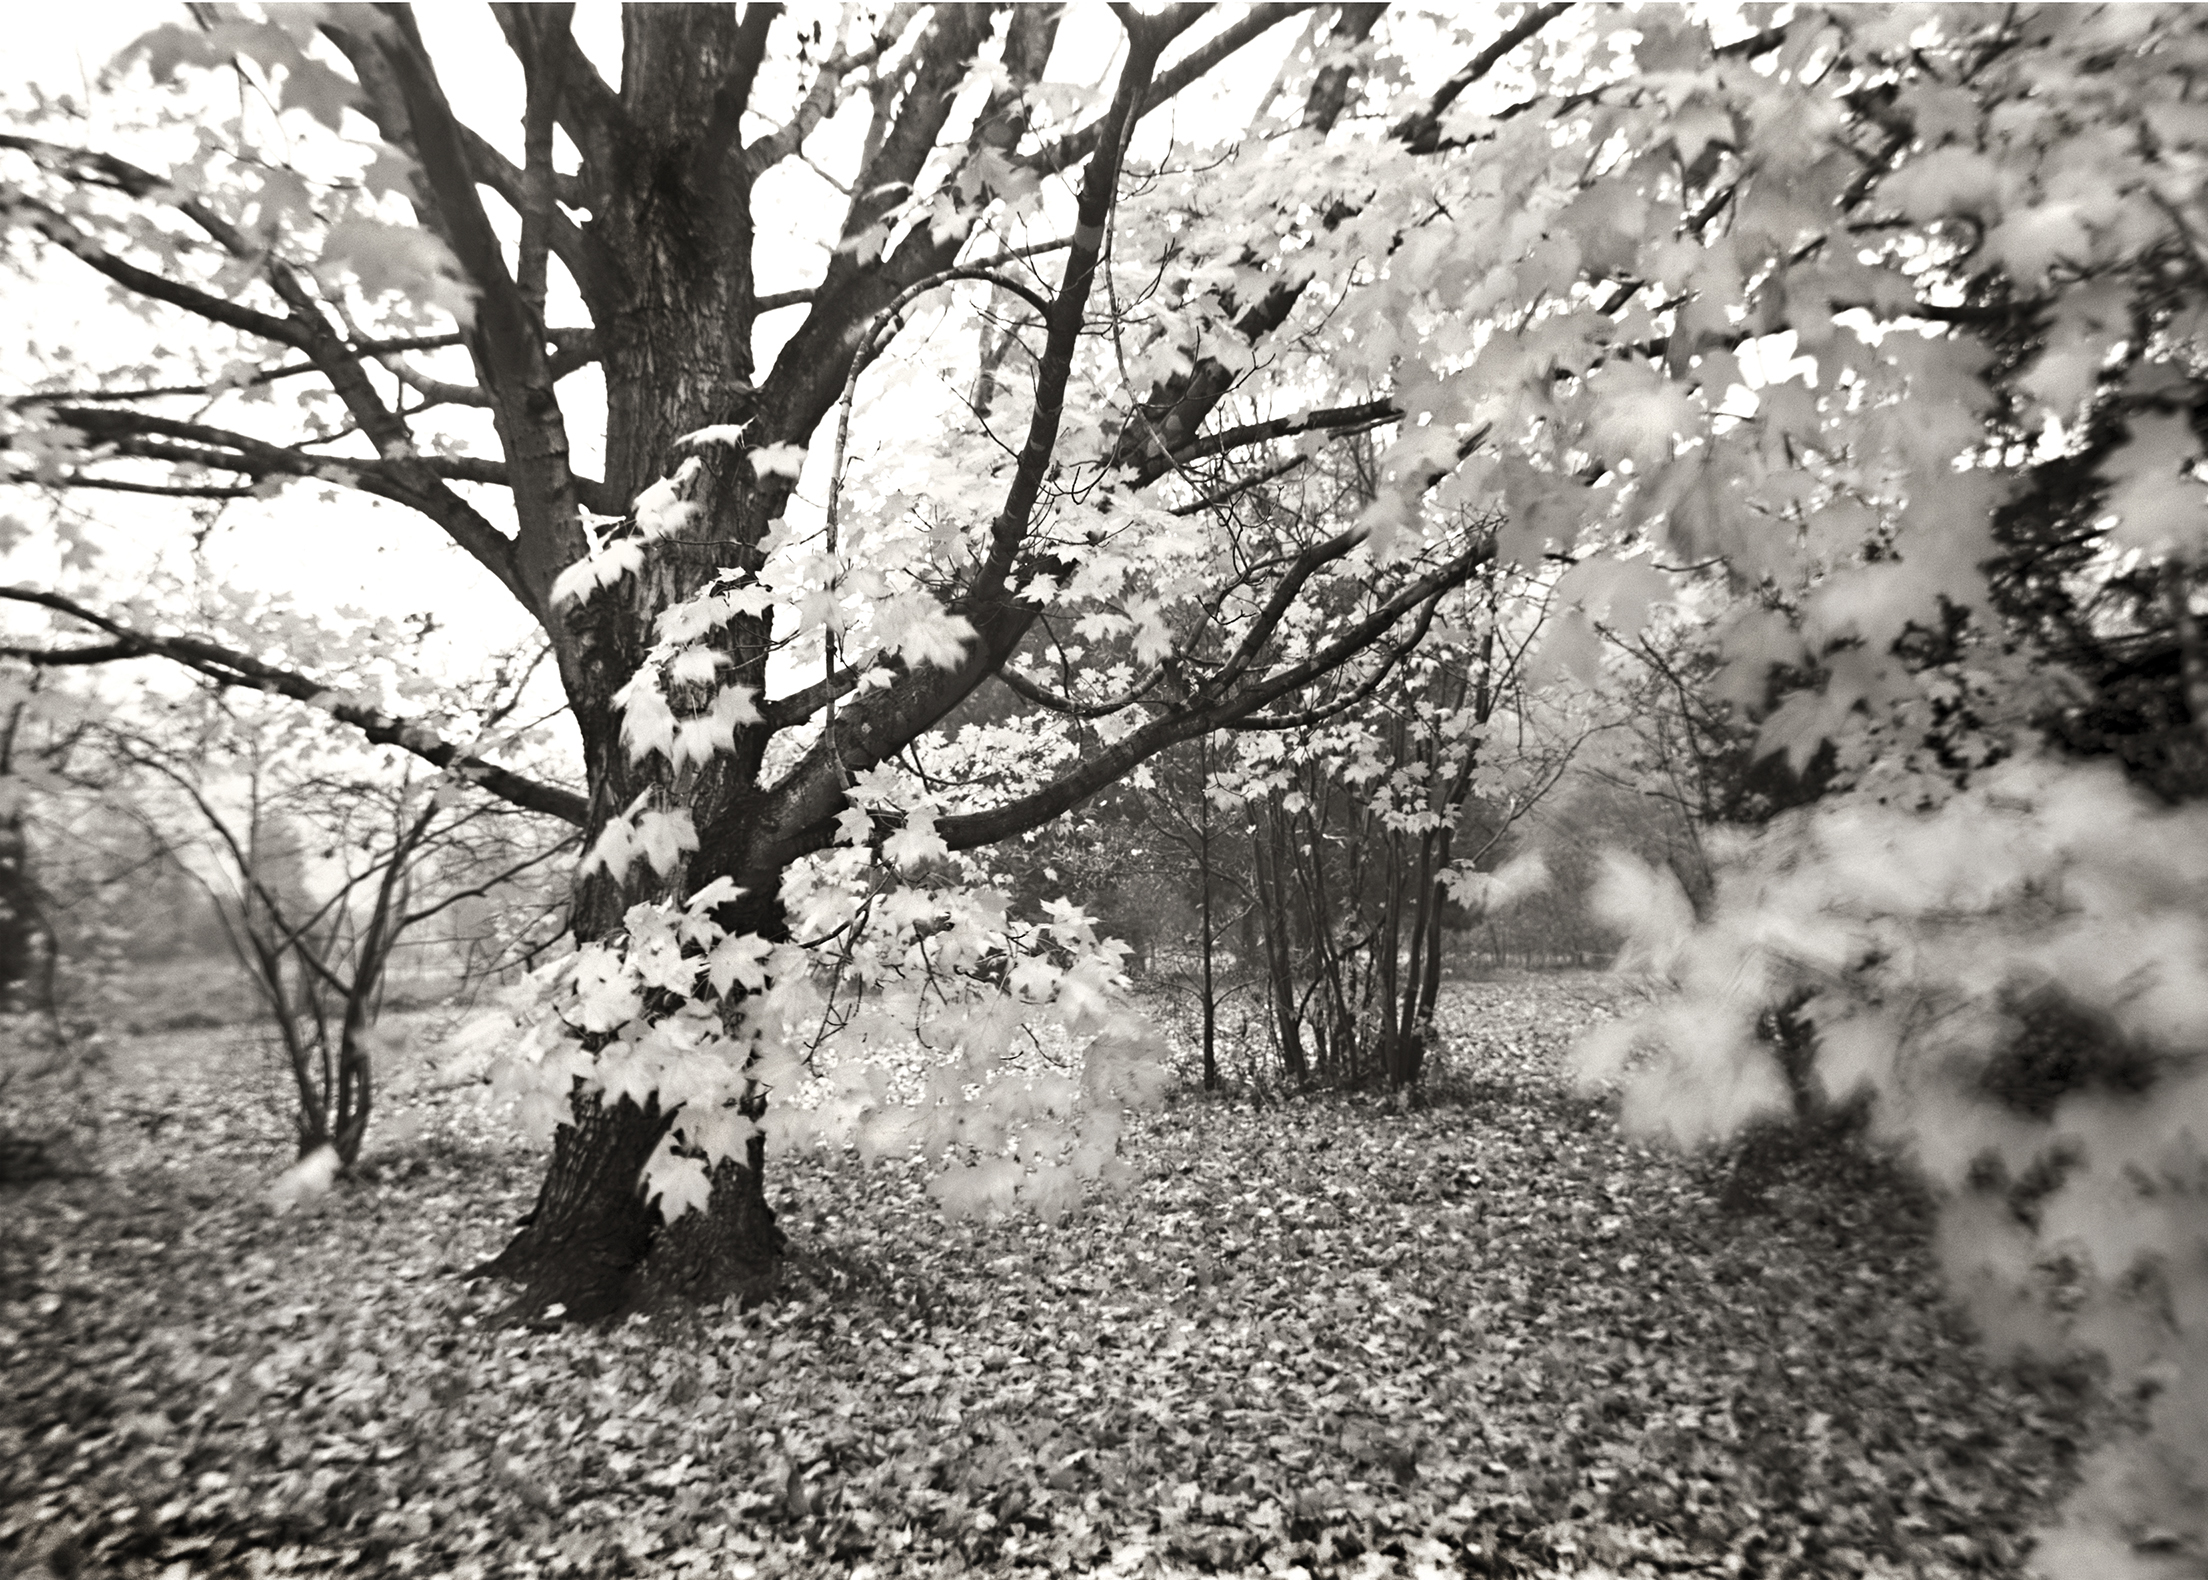  MAPLE TREE, A MOMENT IN TIME, 2007 